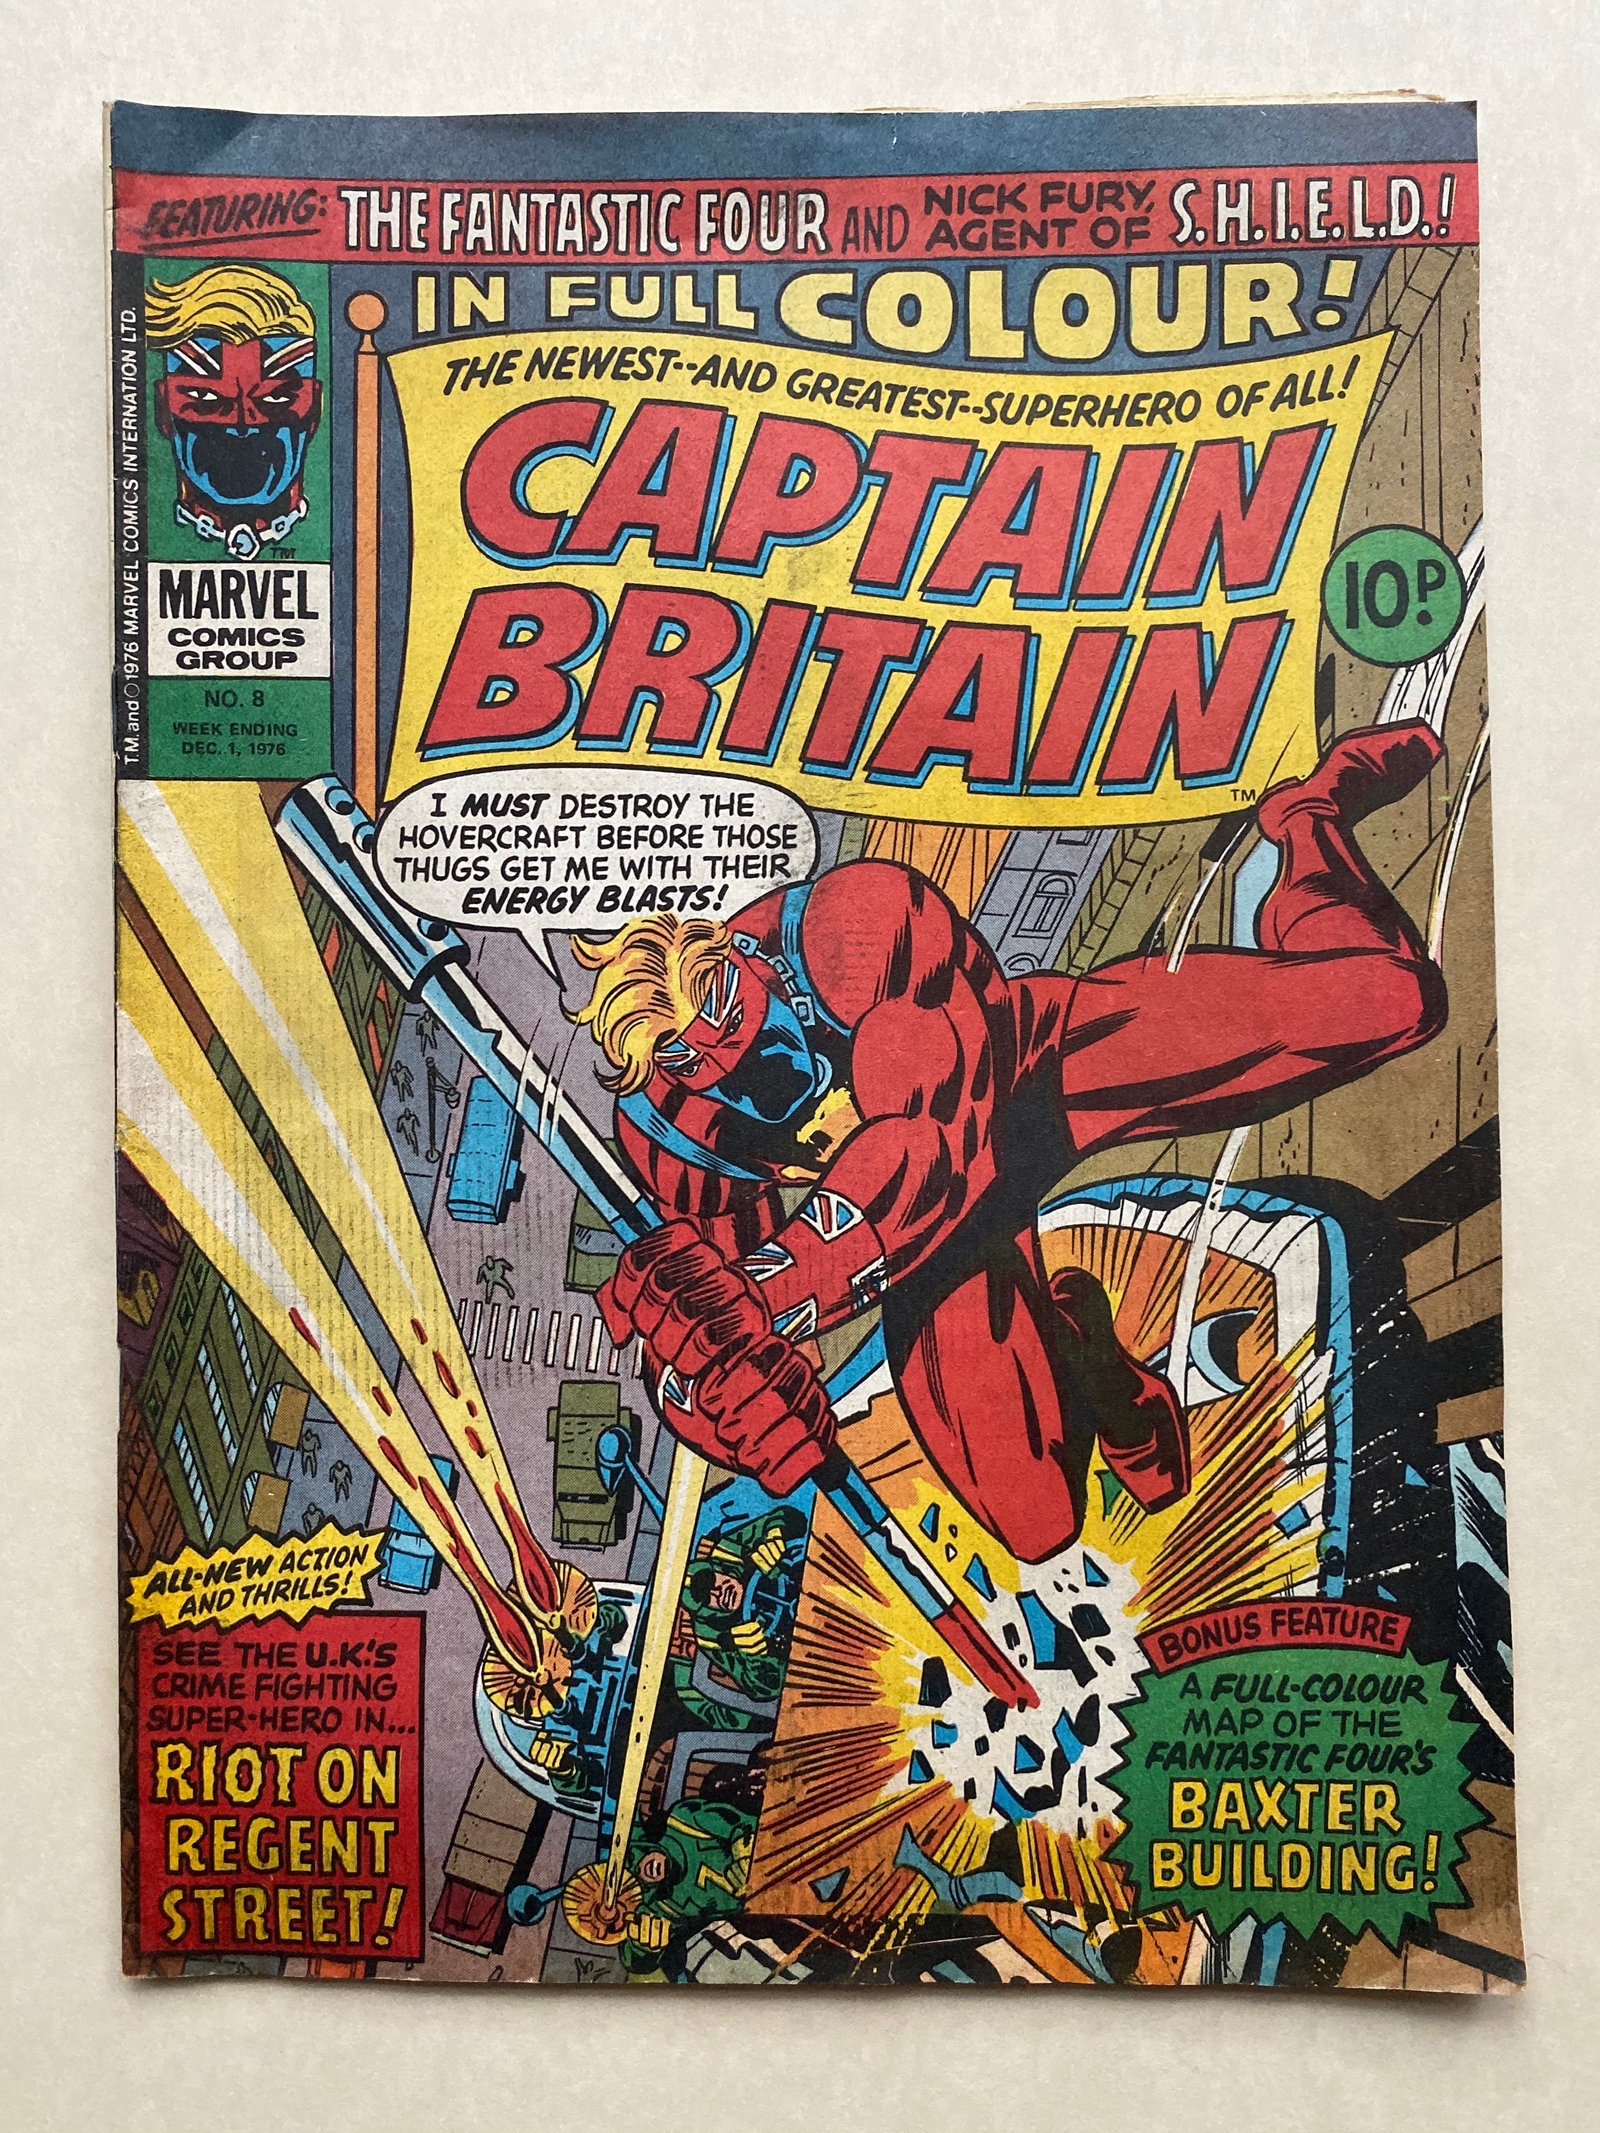 CAPTAIN BRITAIN (6 in Lot) - (1976 - BRITISH MARVEL) - GD/VG (Pence Copy) - Run includes #2, 4, 5, - Image 3 of 8